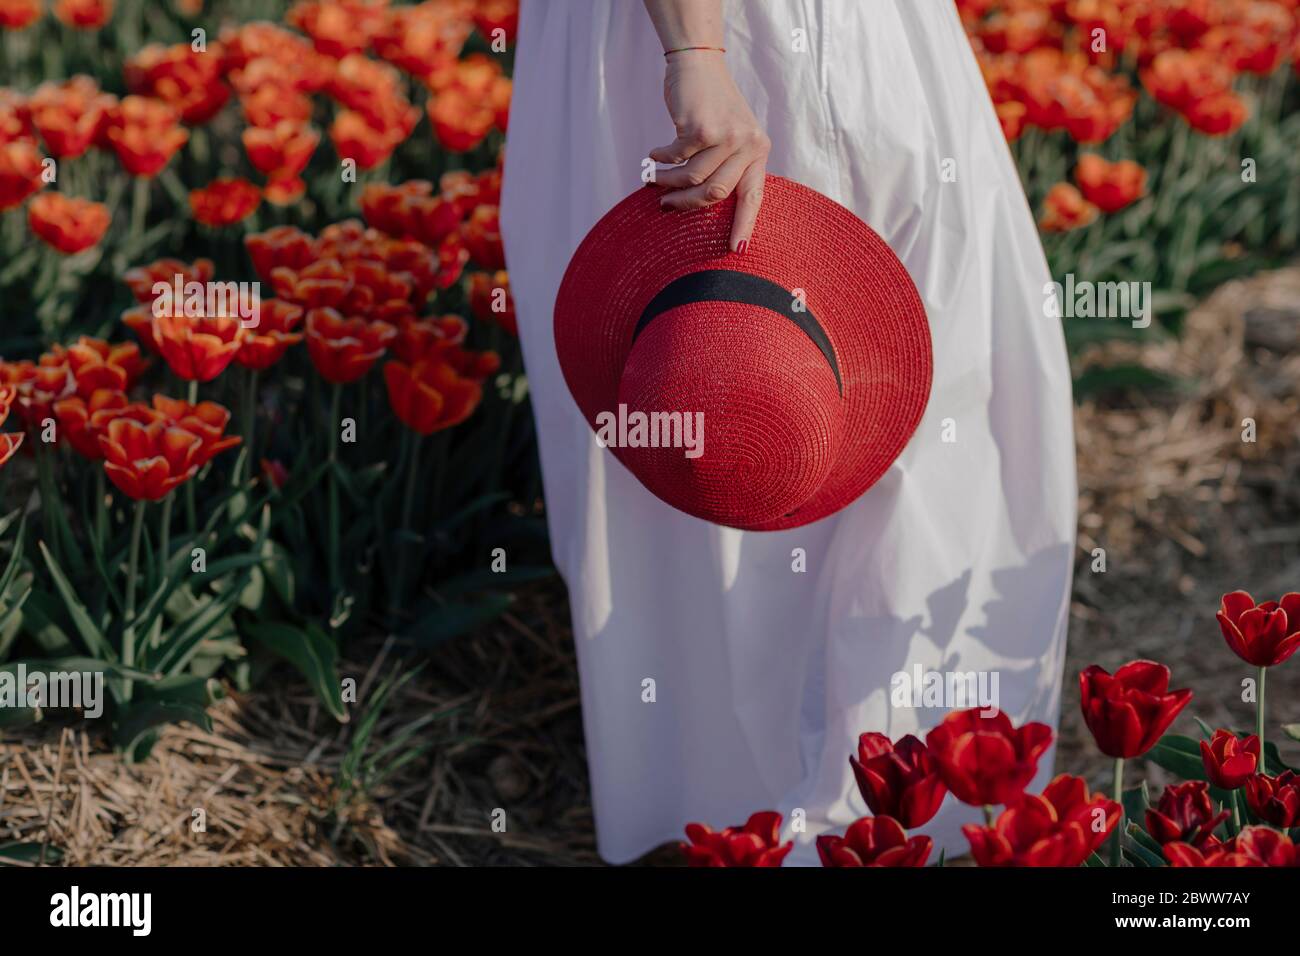 Crop view of woman in a tulip field holding red straw hat Stock Photo